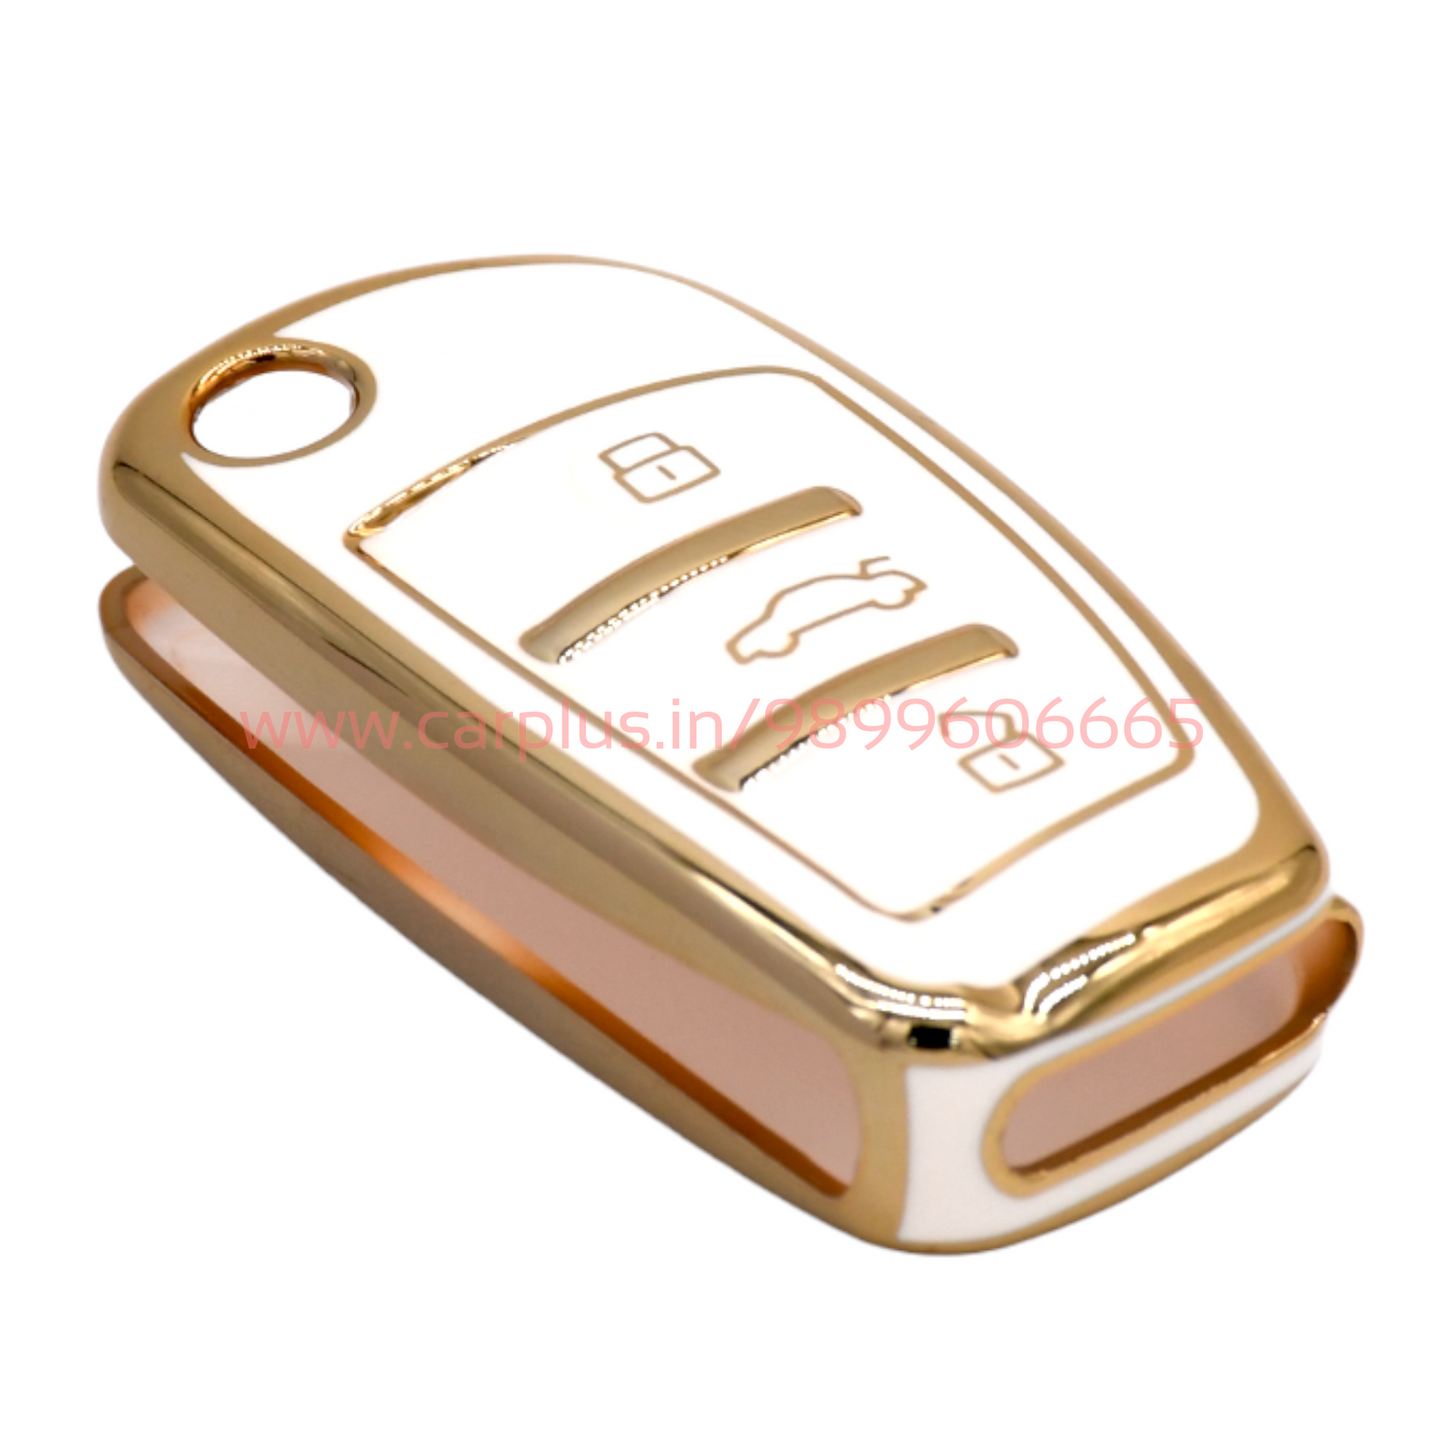 
                  
                    KMH TPU Gold Car Key Cover Compatible with Audi A1 A3 A6 Q2 Q3 Q7 TT TTS R8 S3 S6 RS3 Smart Folding Key Cover-TPU GOLD KEY COVER-KMH-KEY COVER-White-CARPLUS
                  
                